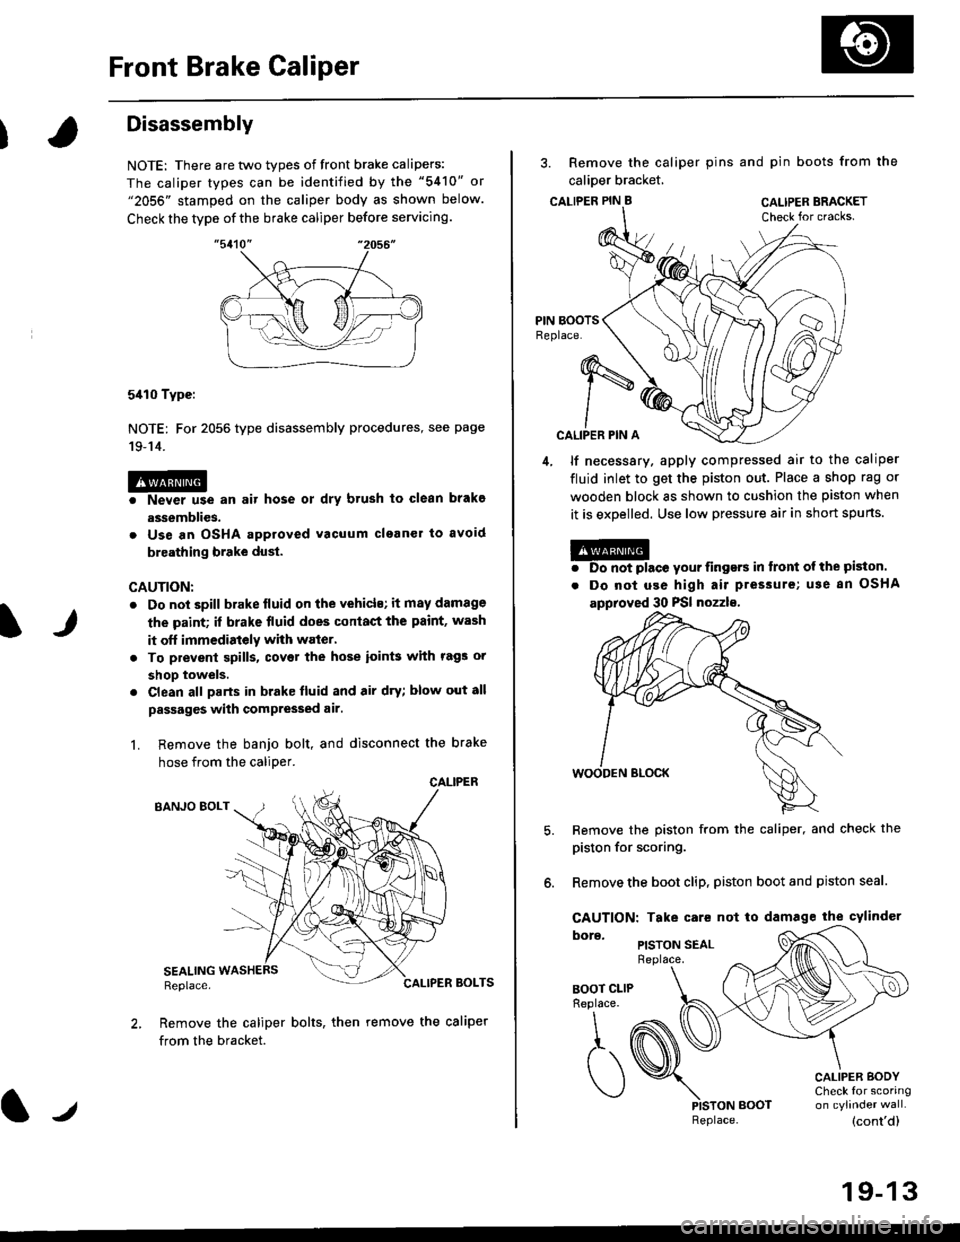 HONDA CIVIC 1997 6.G Owners Manual Front Brake Caliper
It
Disassembly
NOTE: There are two types of front brake calipers:
The caliper types can be identified by the "5410" or"2056" stamped on the caliper body as shown below.
Check the t